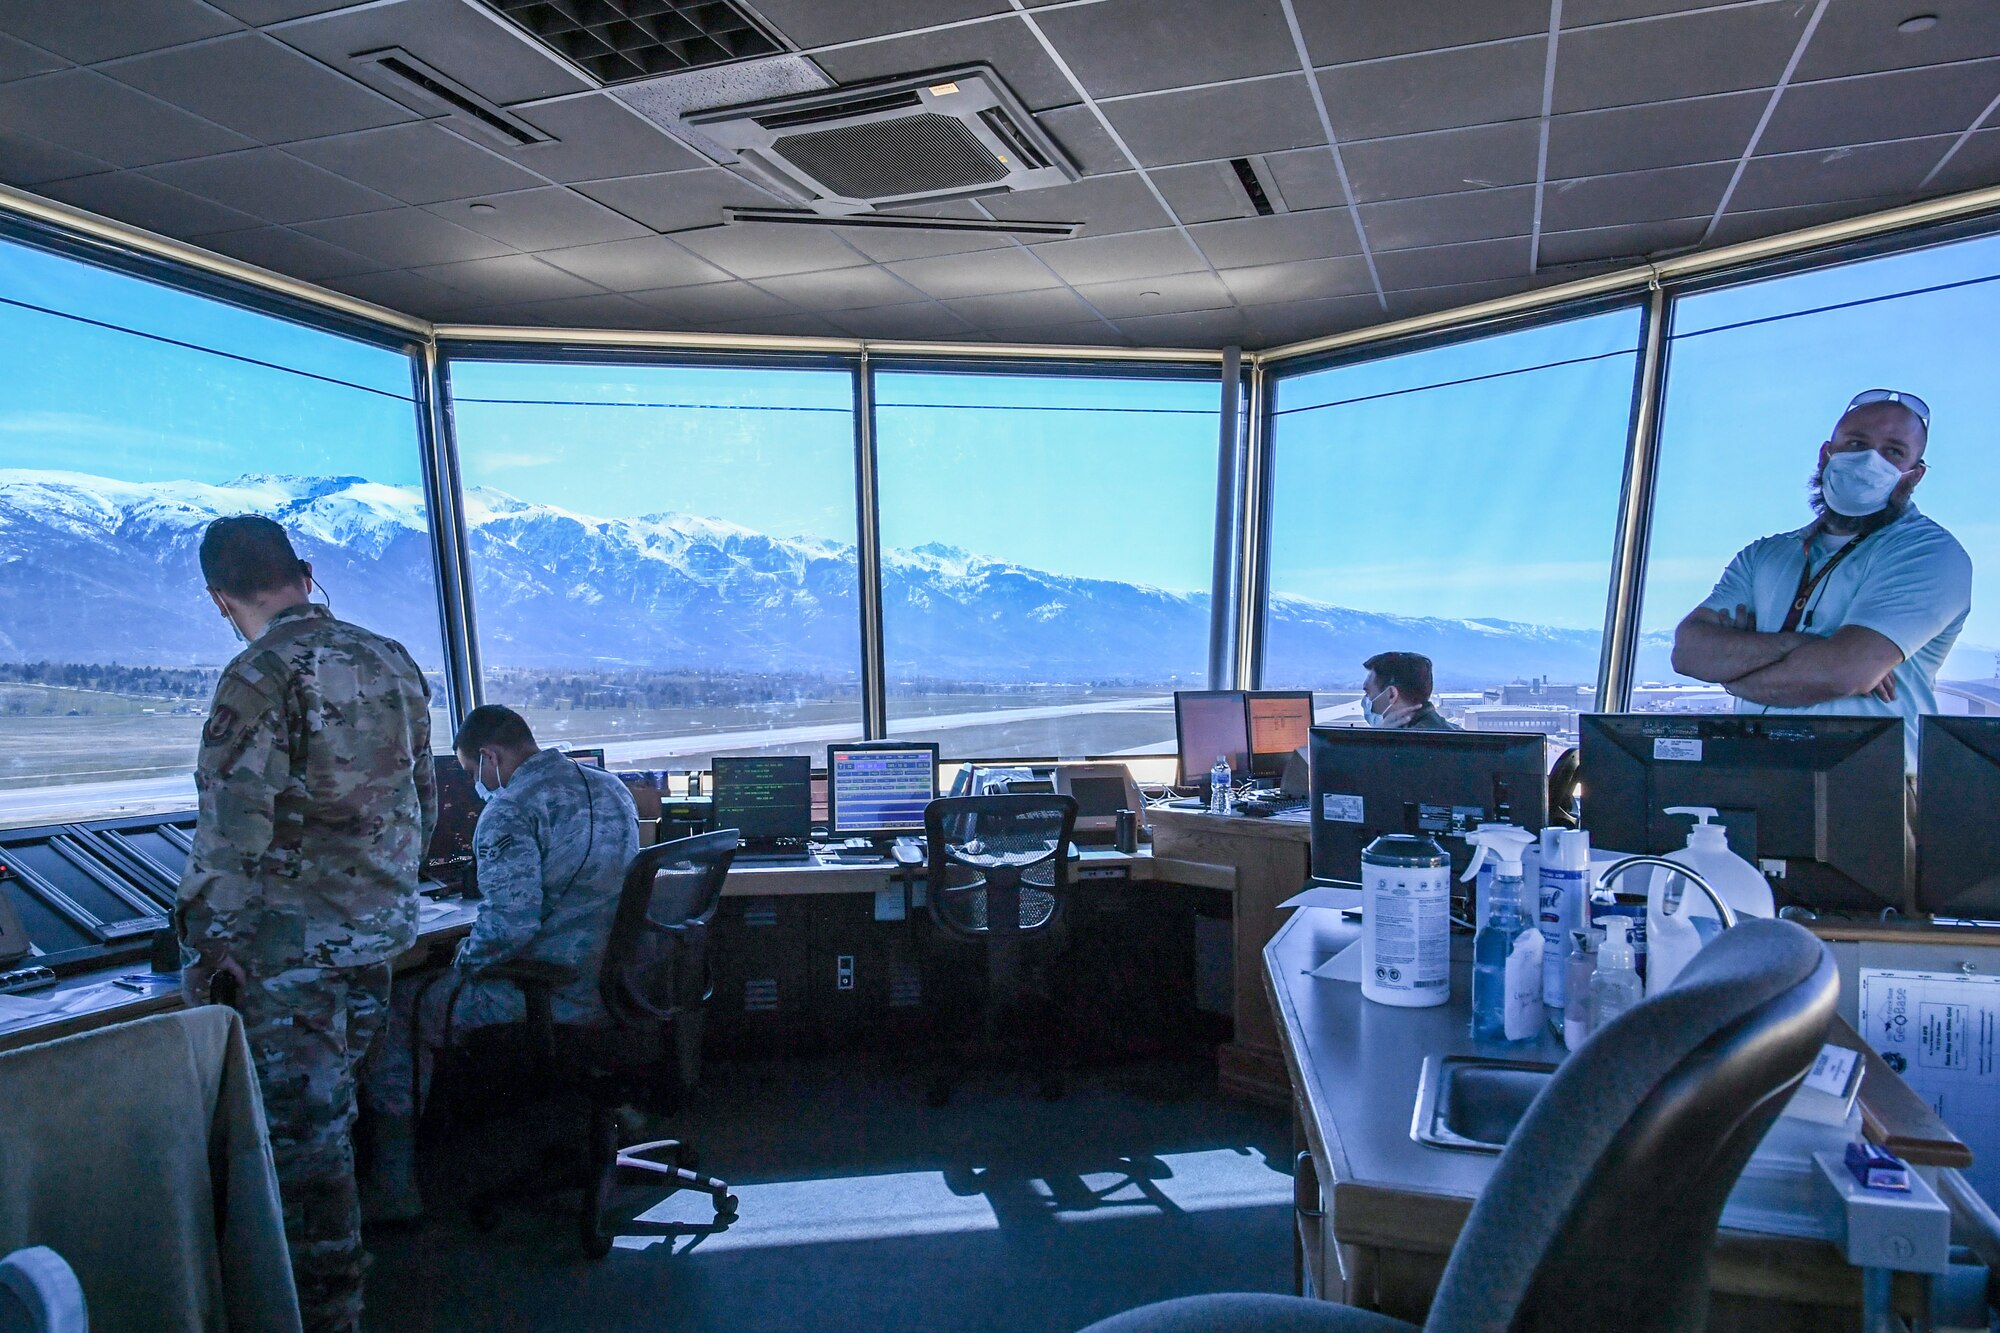 Air traffic controllers working in the tower at Hill Air Force Base.